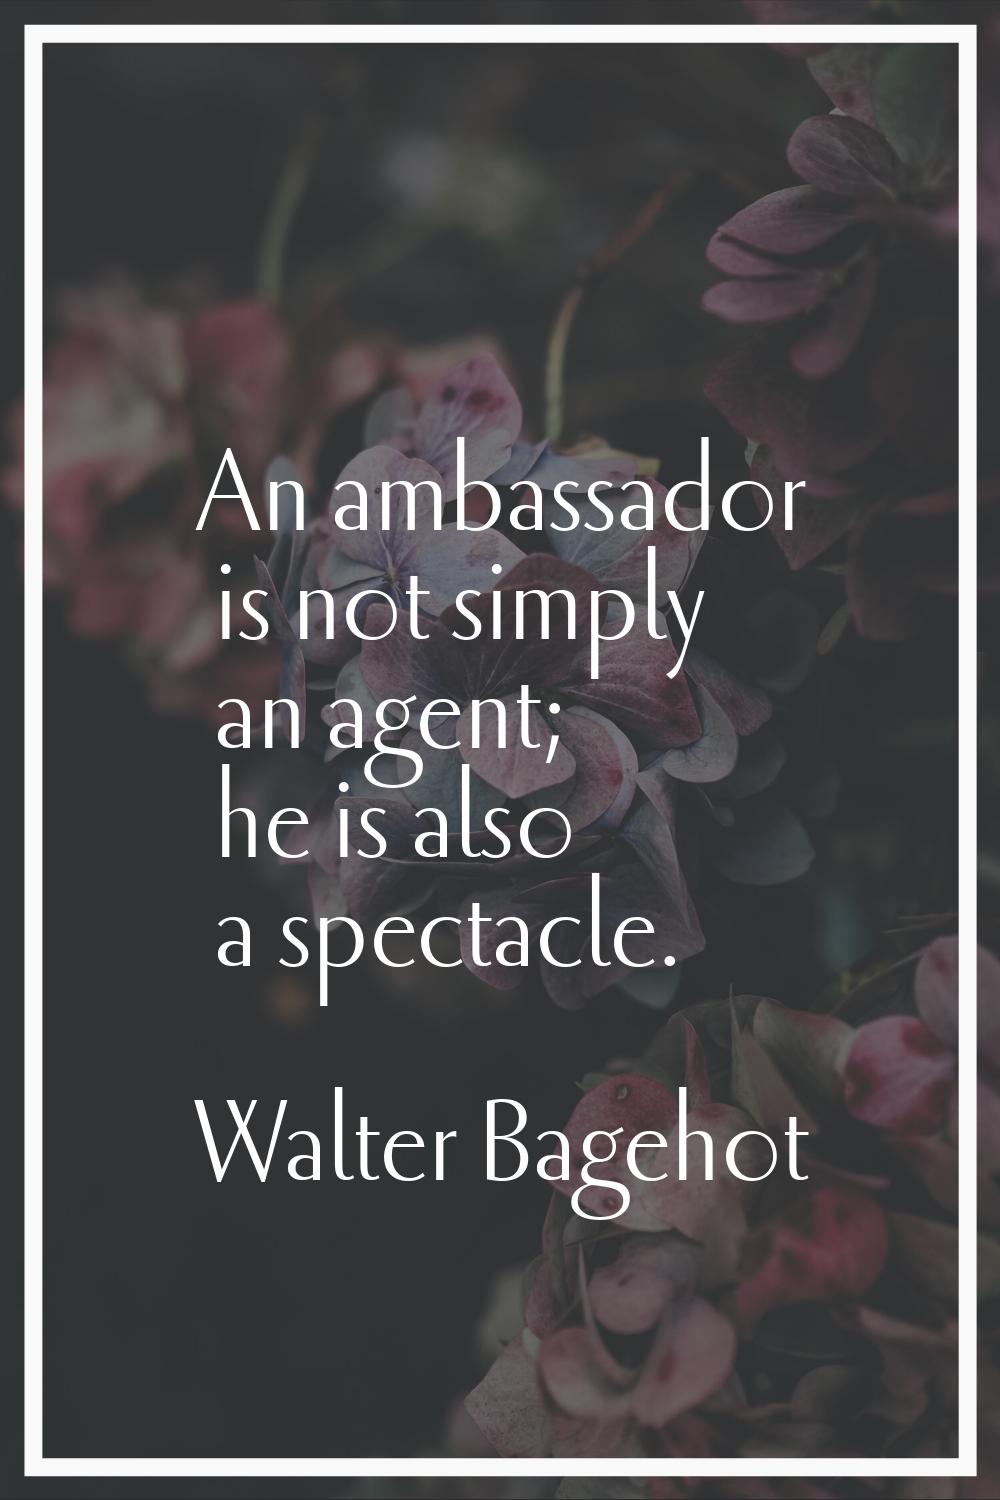 An ambassador is not simply an agent; he is also a spectacle.